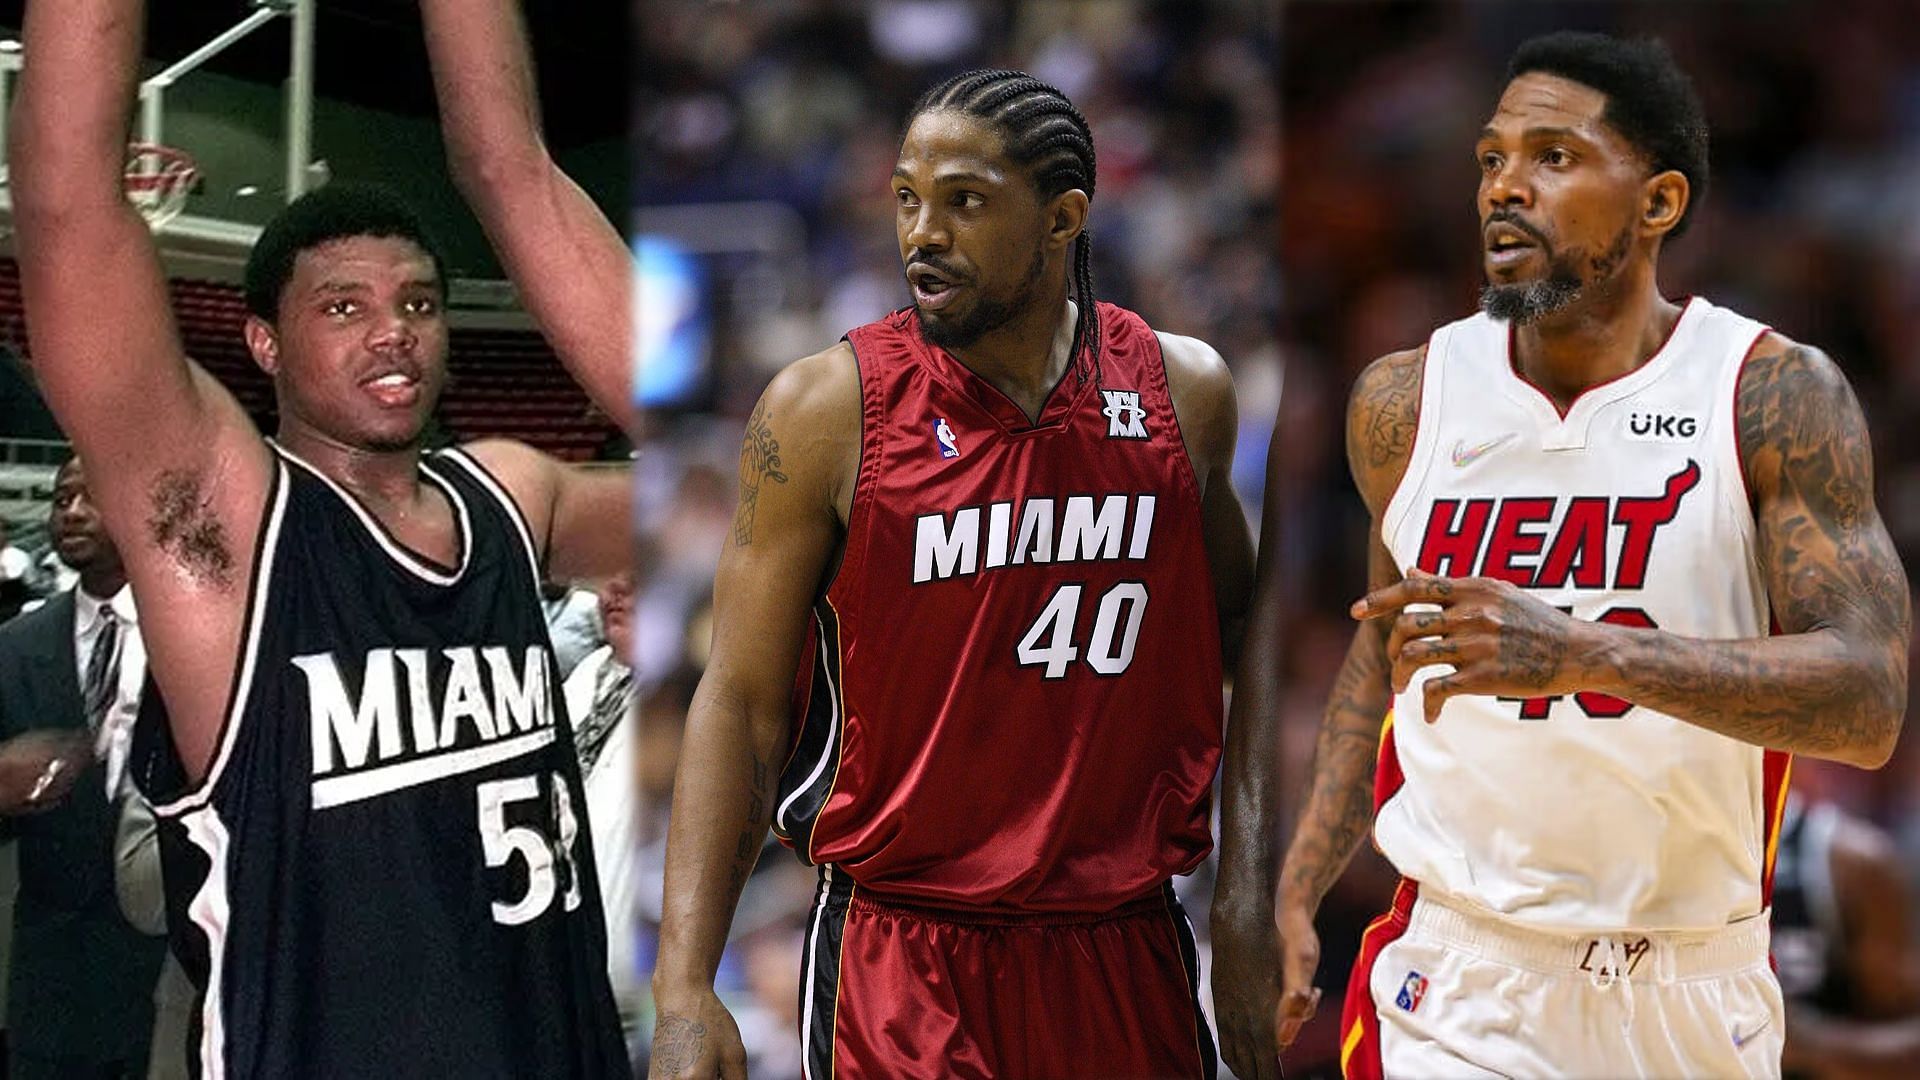 Haslem is among the most valuable and loyal NBA players